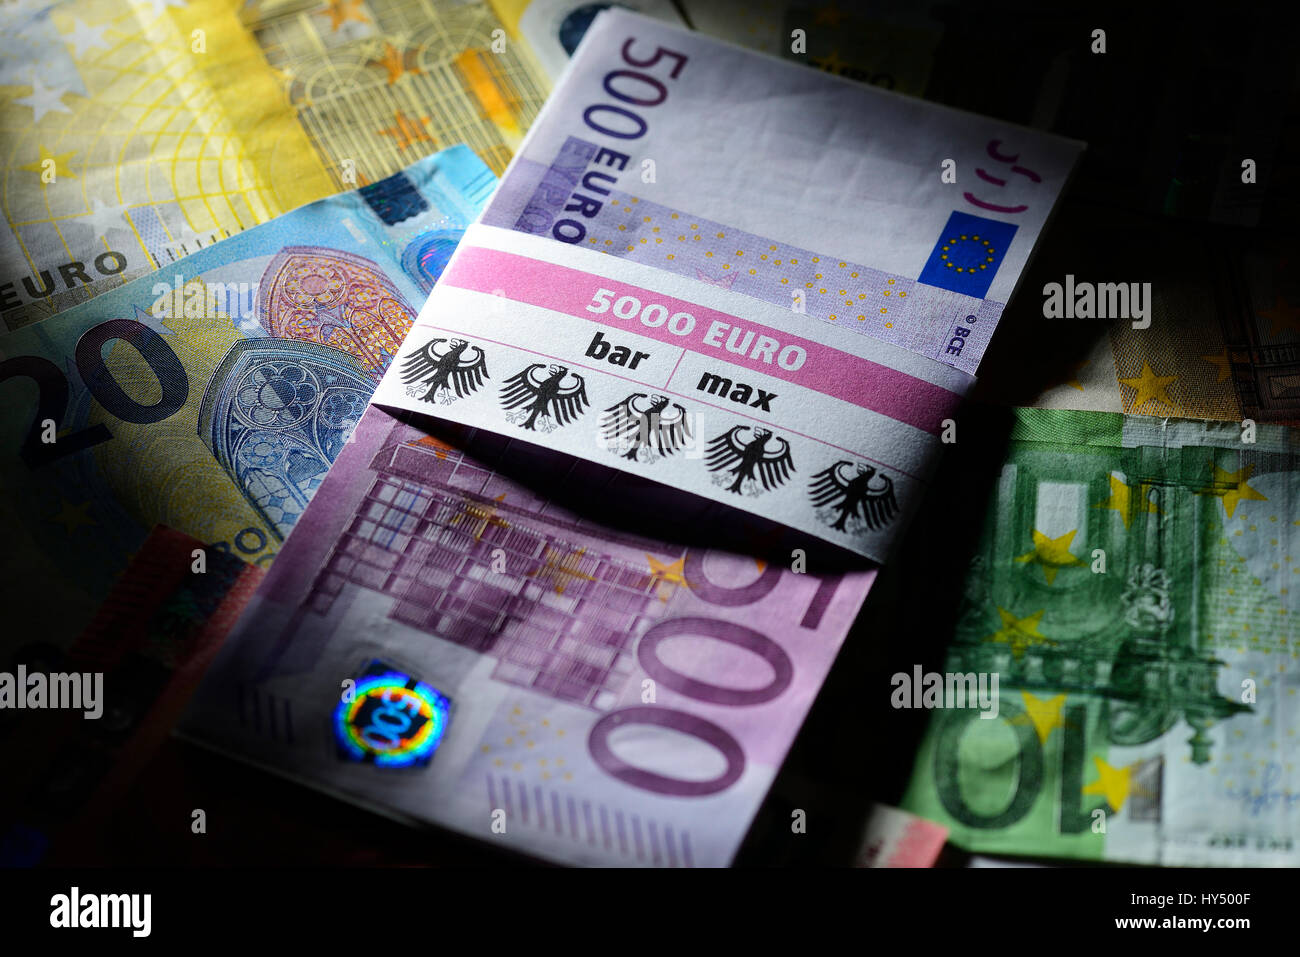 Bank Notes With Banderole 5000 Euros Cash Max Planned Upper Limit For Cash Payment Geldscheine Mit Banderole 5000 Euro Bar Max Geplante Obergrenze Stock Photo Alamy